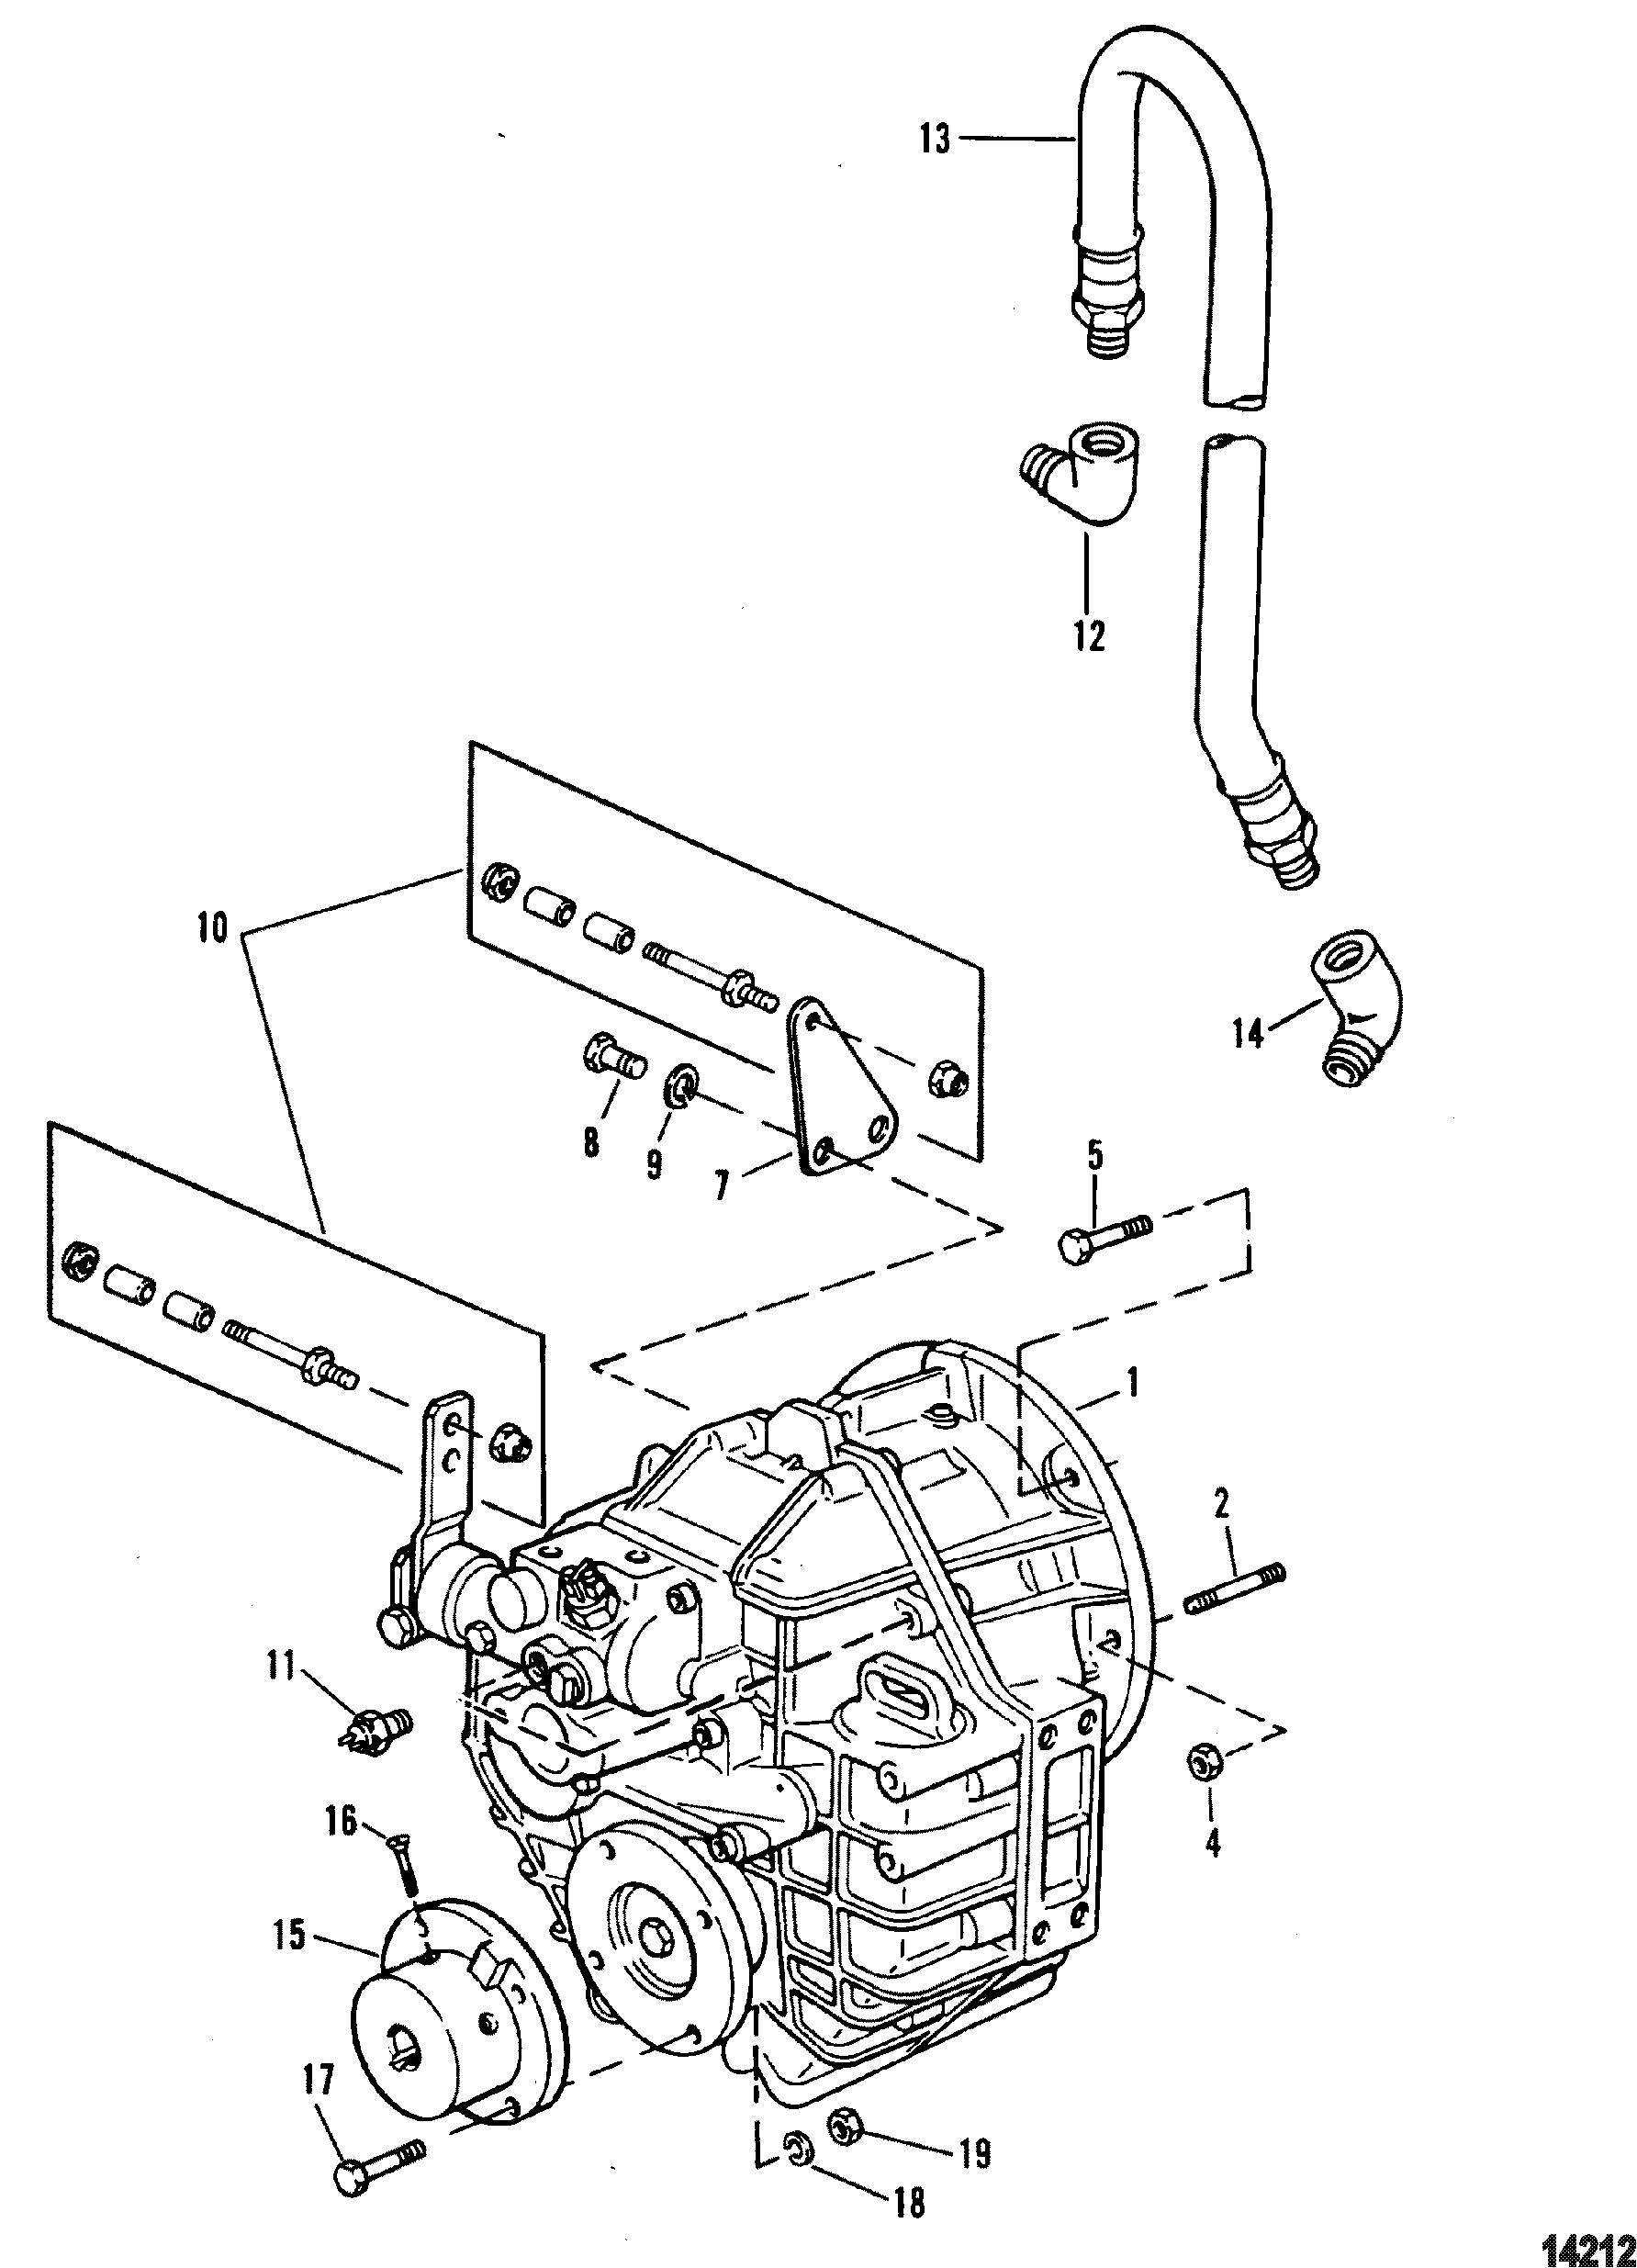 Transmission And Related Parts(Inboard)